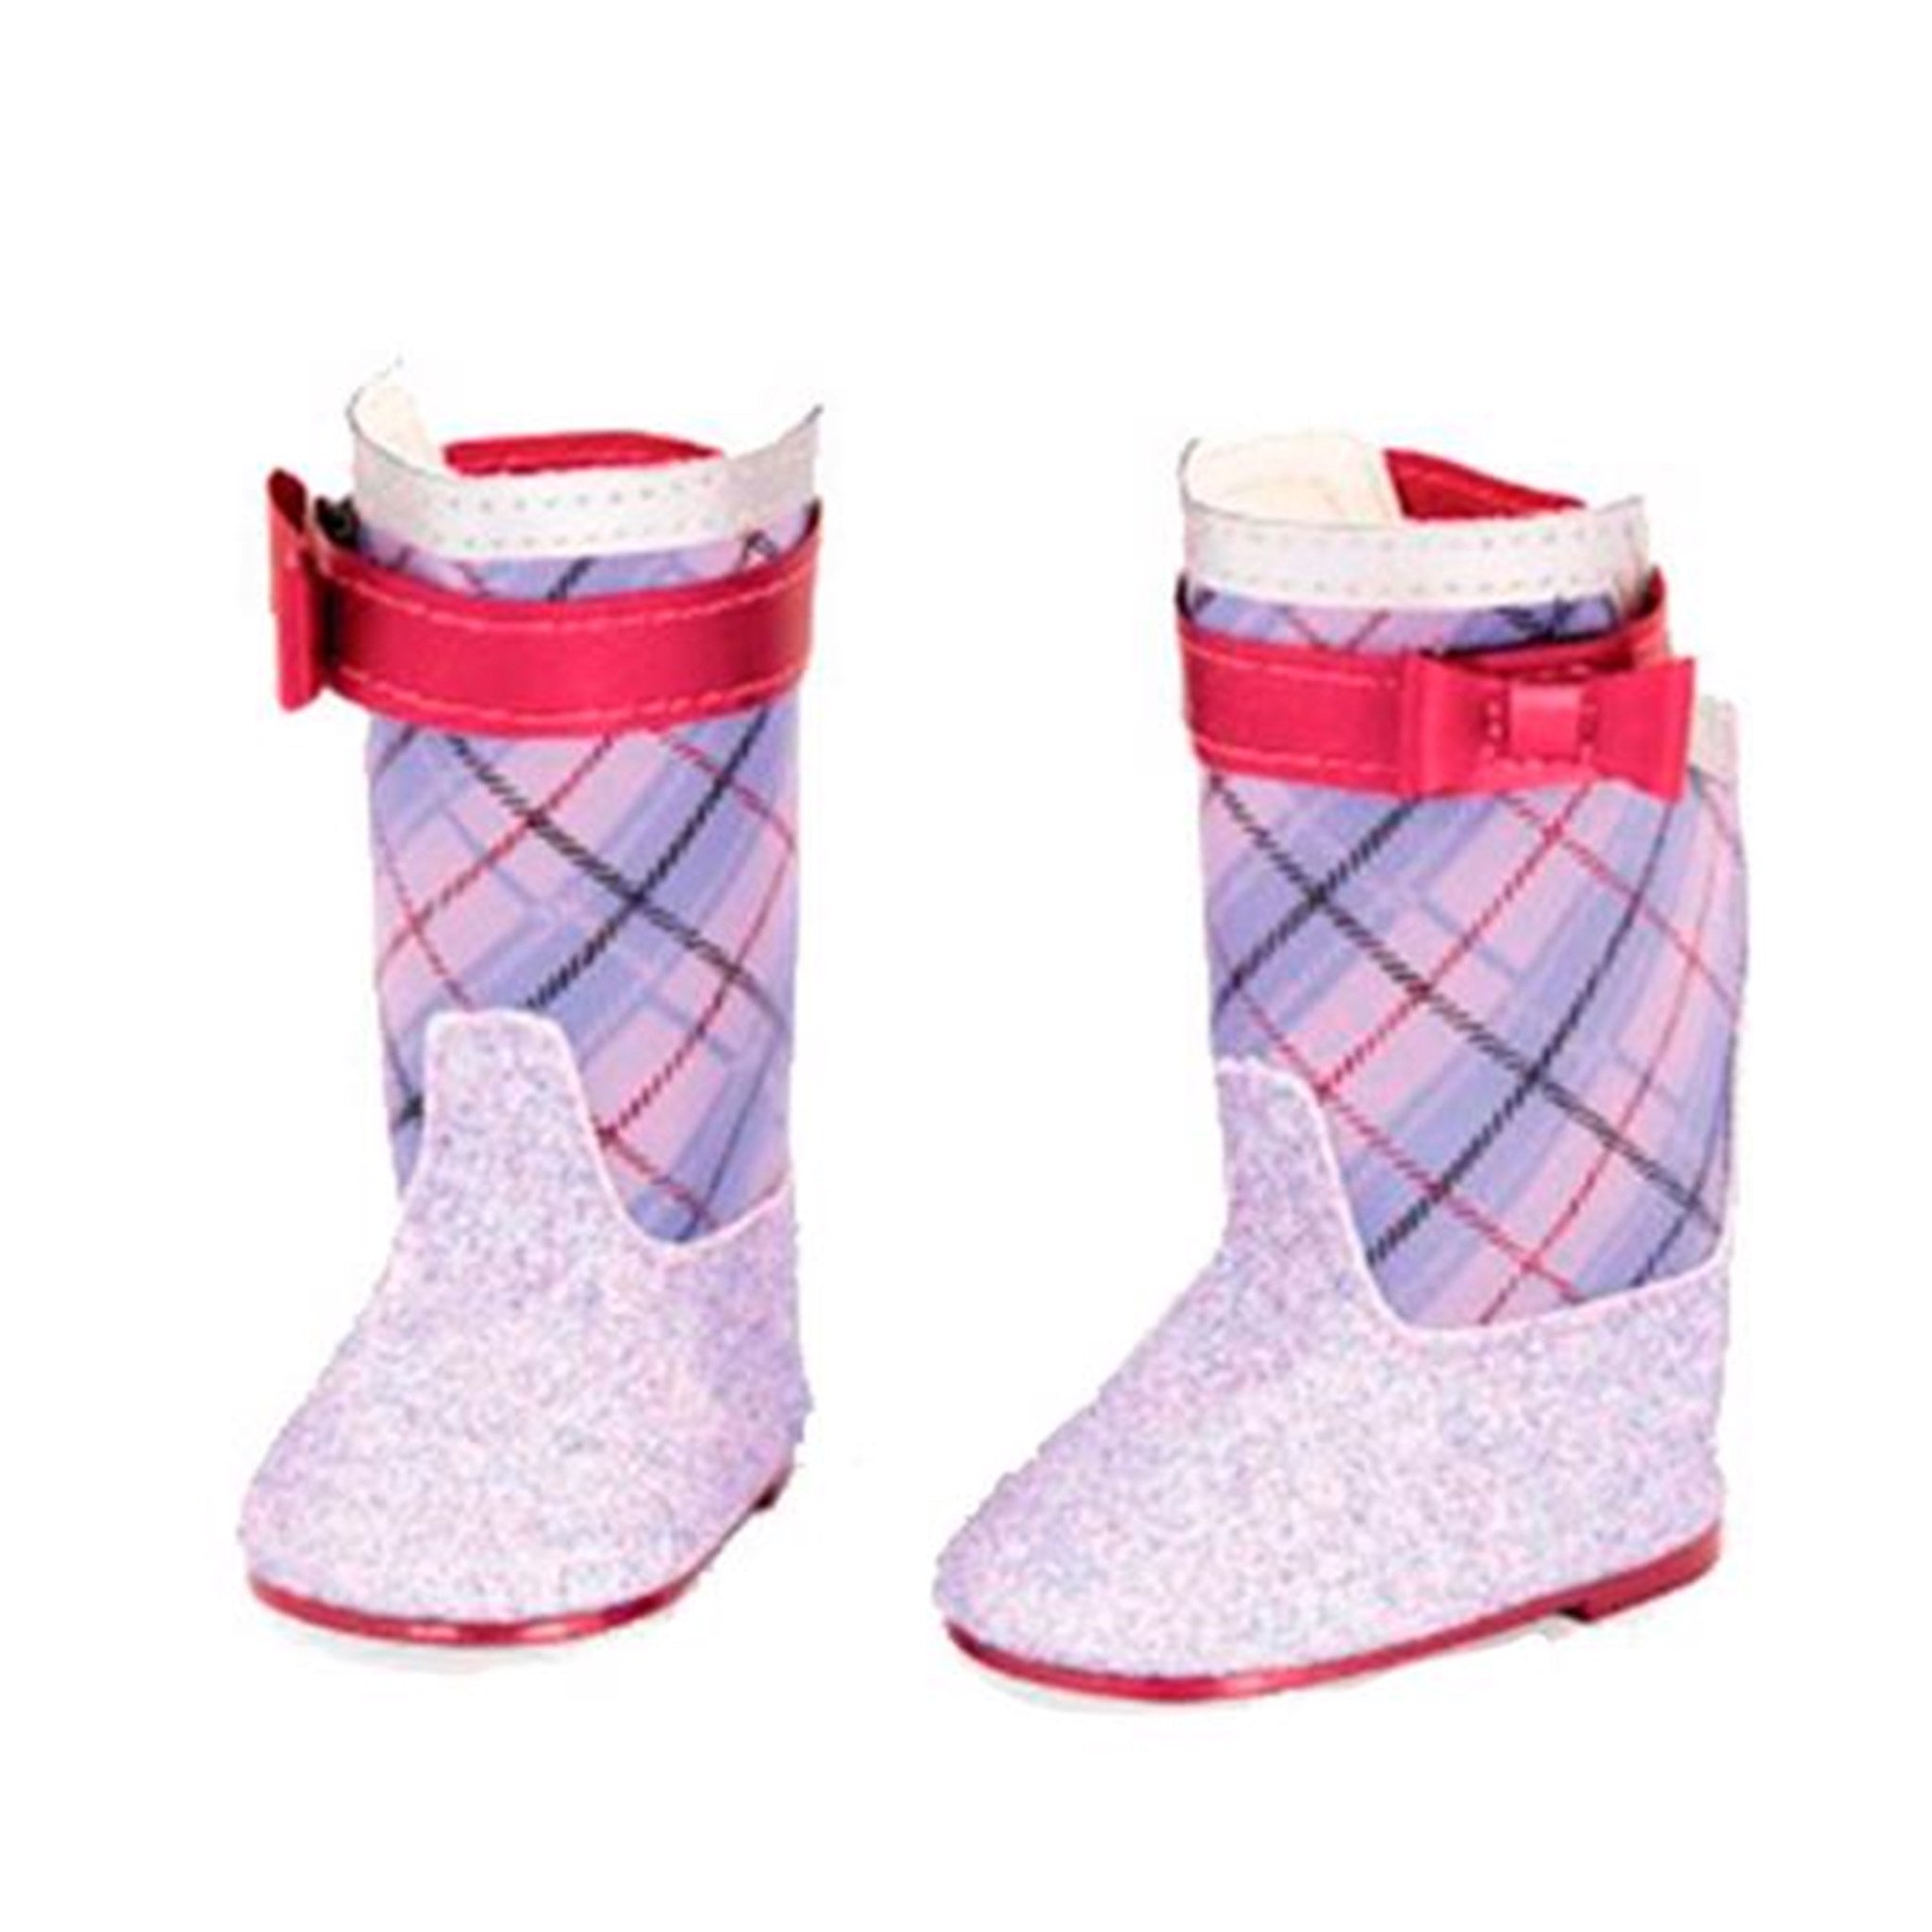 Our Generation Doll Shoes - Boots w. Glitter Purple